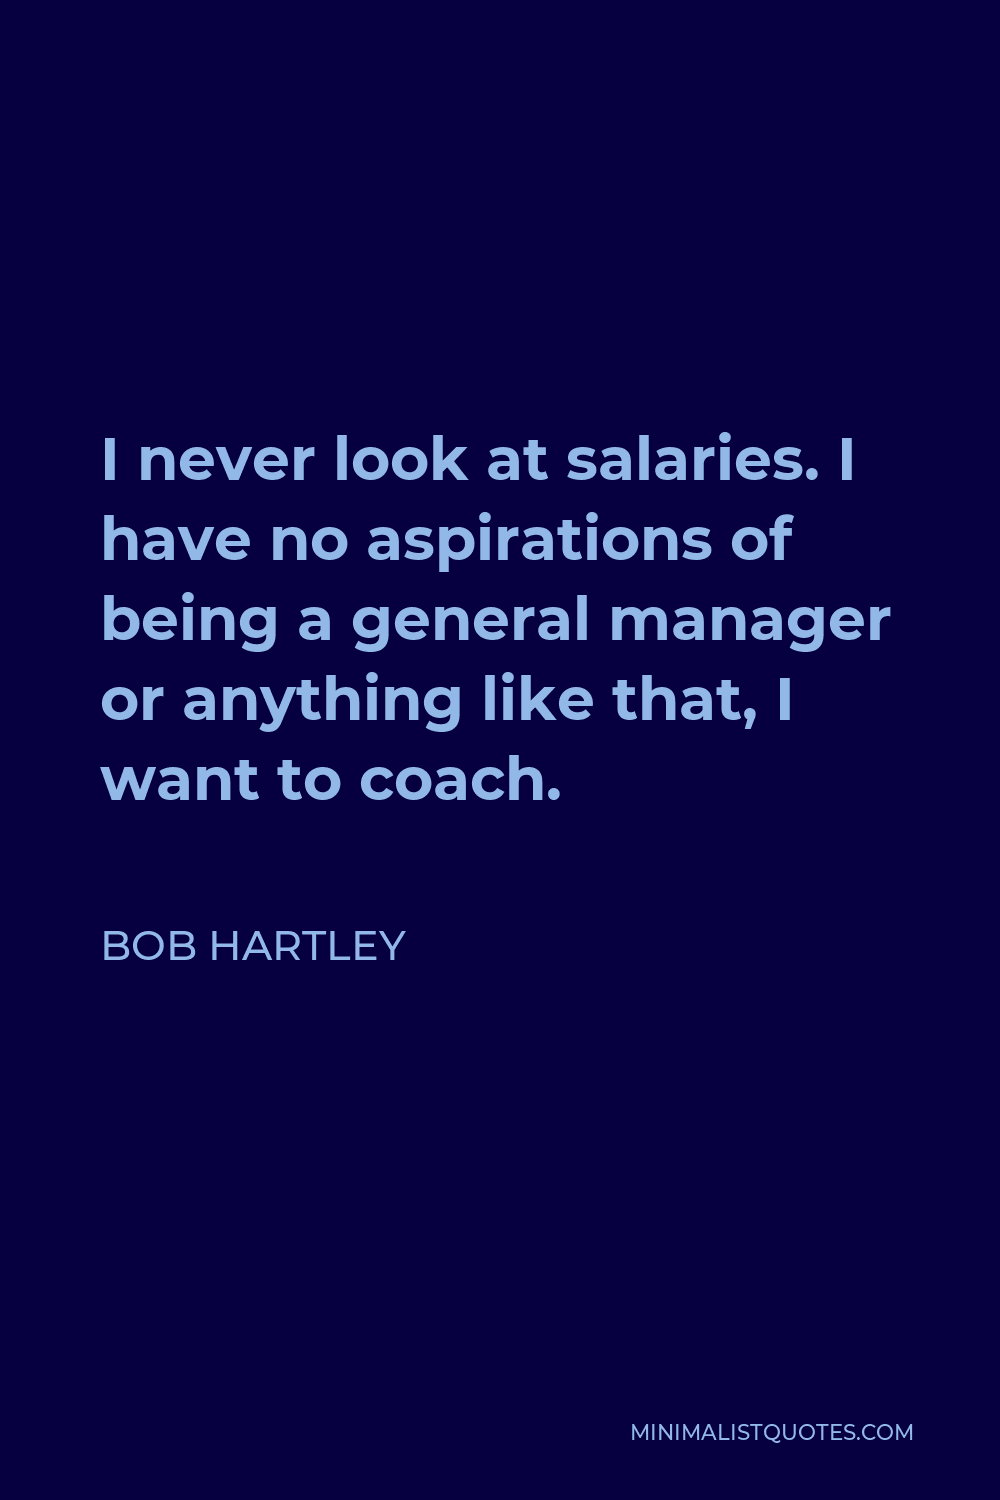 Bob Hartley Quote - I never look at salaries. I have no aspirations of being a general manager or anything like that, I want to coach.